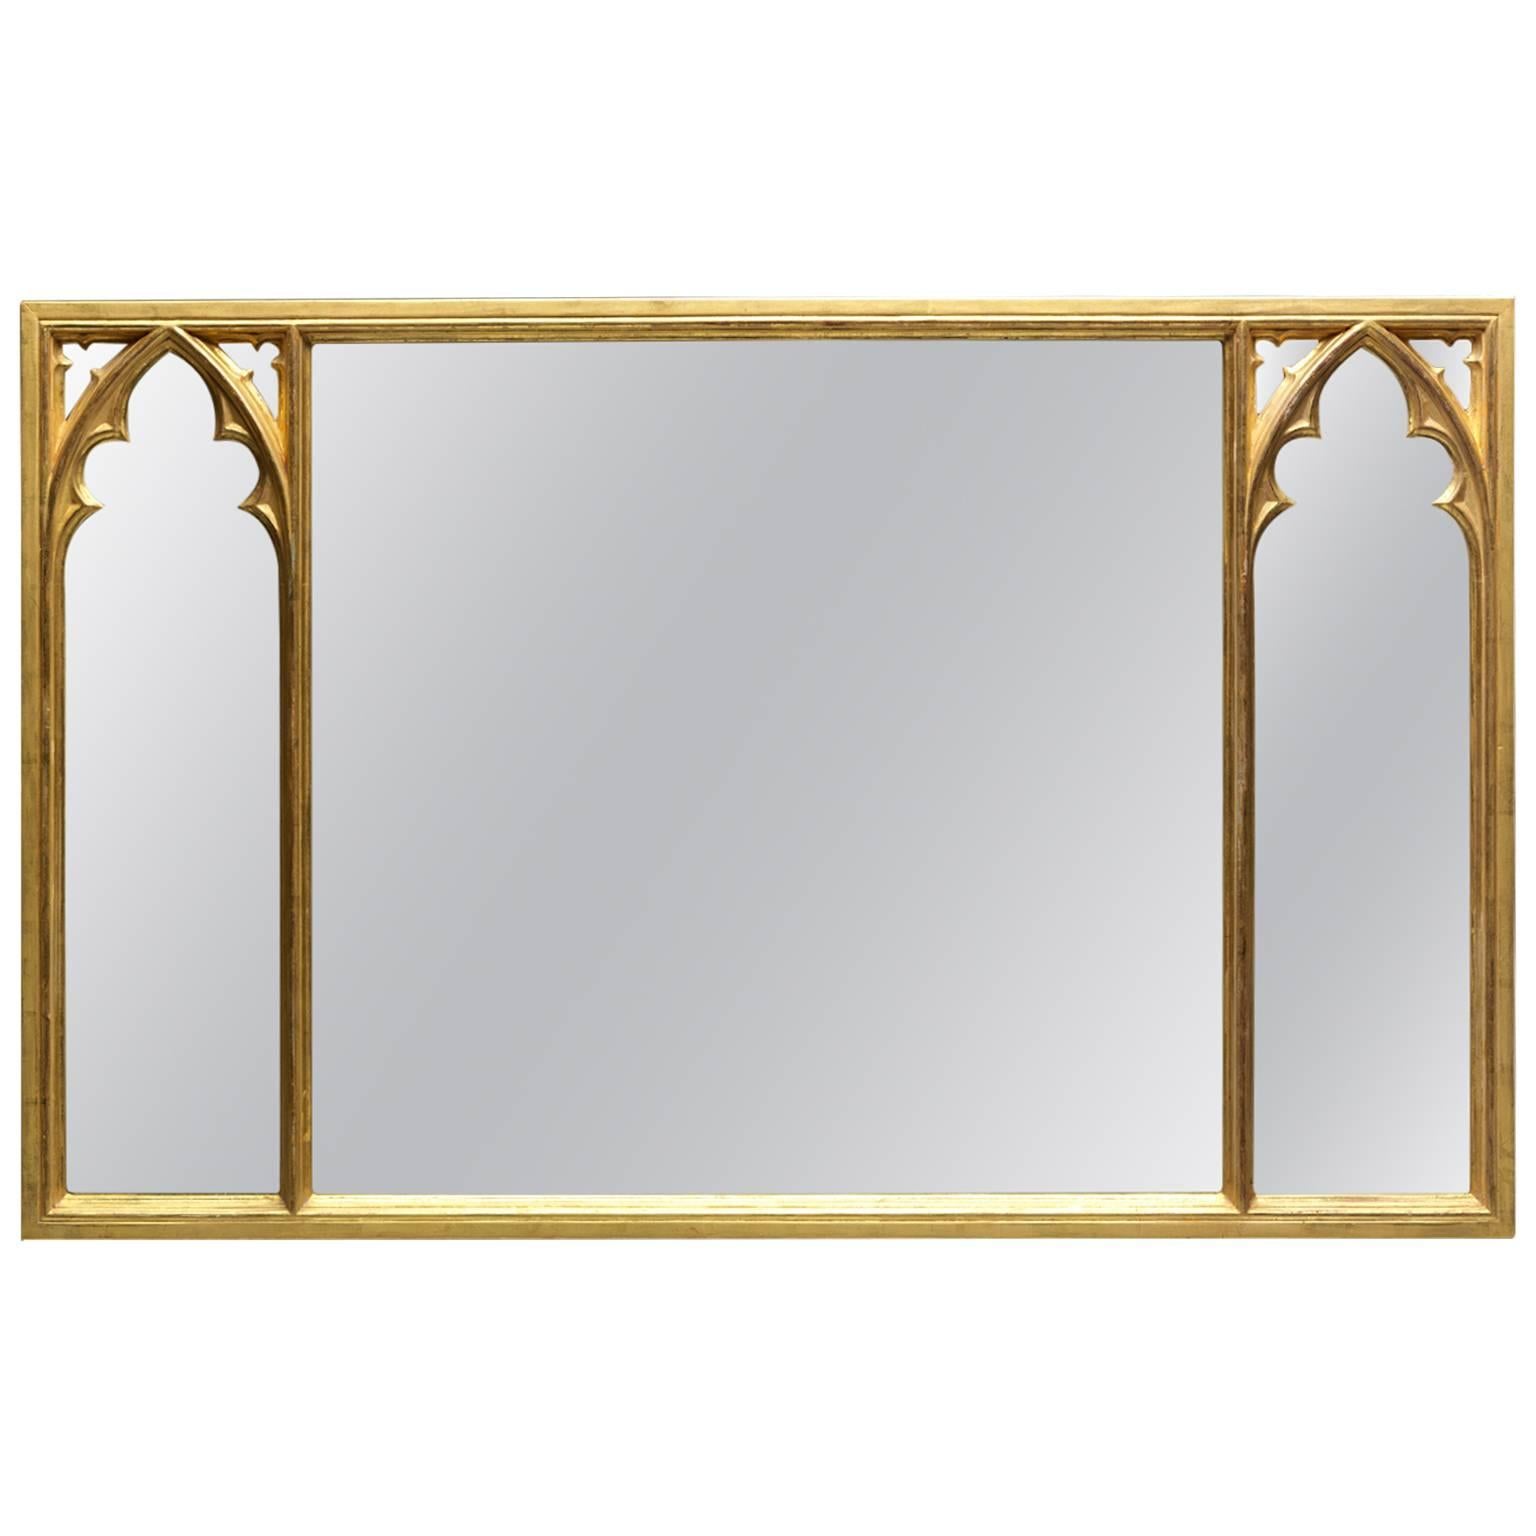 Strawberry Hill Gothic Overmantel Mirror For Sale